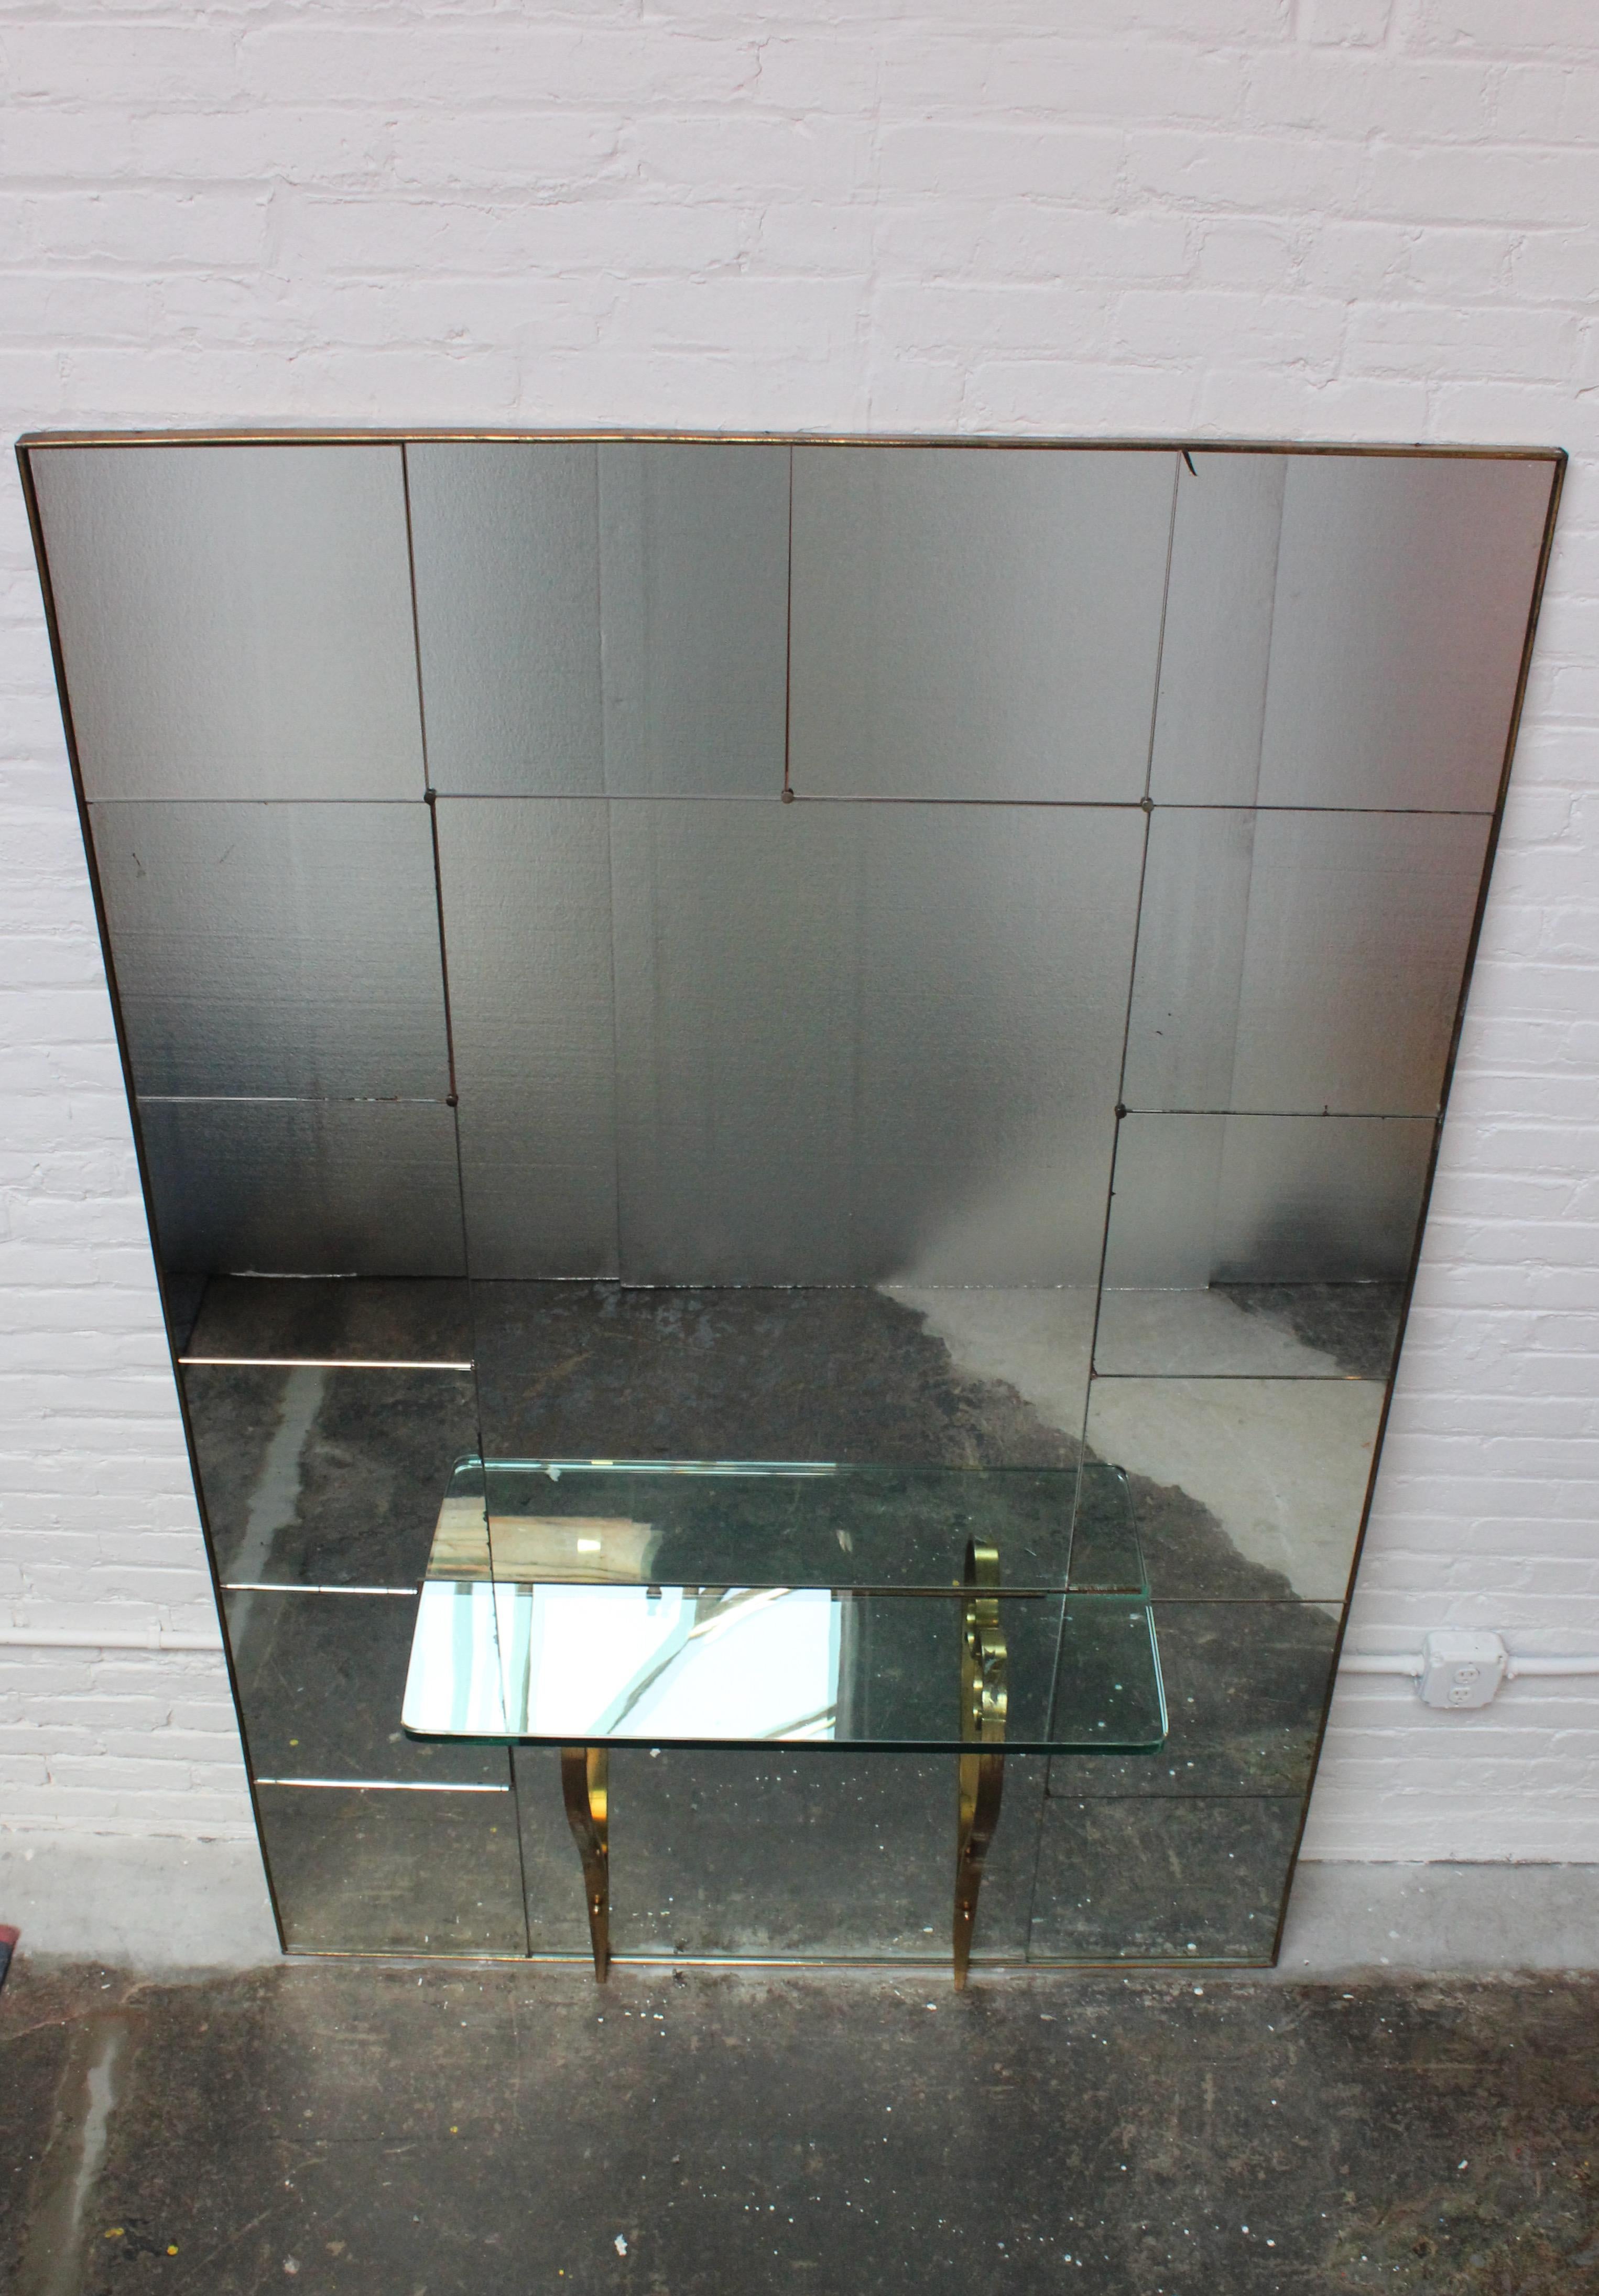 Sophisticated and elegant hallway mirror with tempered glass console table supported by two brass brackets (ca. late 1940s / early 1950s, Italy).
Brass lined wooden frame houses a total of sixteen mirrored inserts (fourteen squares lining the edges